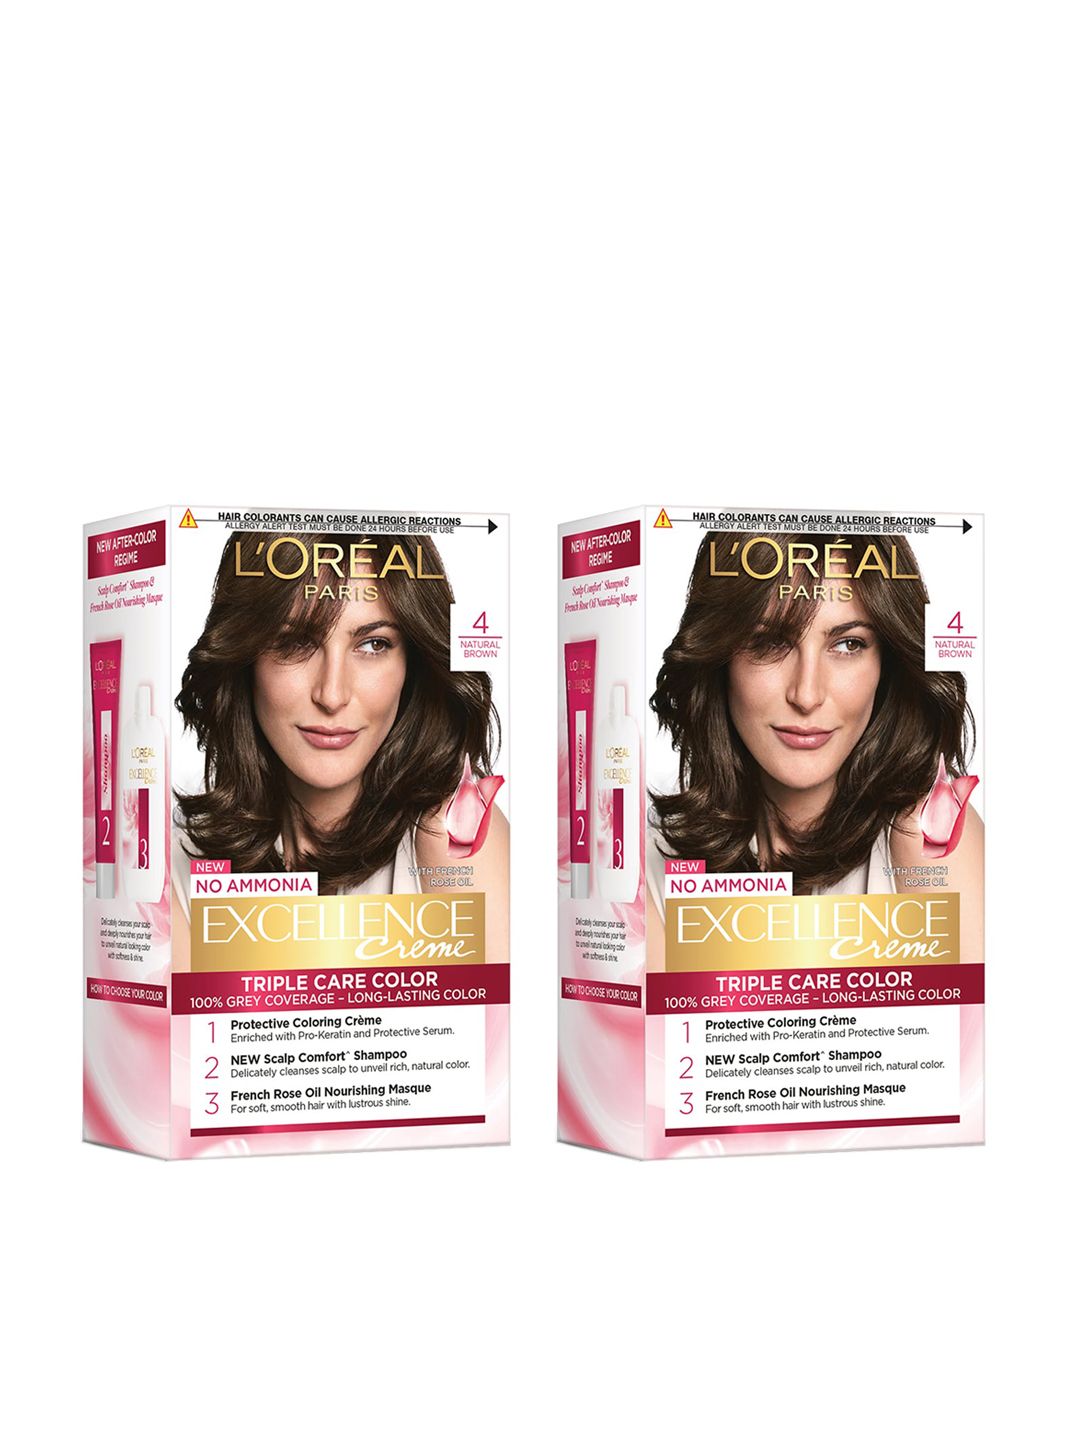 L'Oreal Paris Set of 2 Excellence Creme Triple Care Hair Color - Natural Brown 4 Price in India